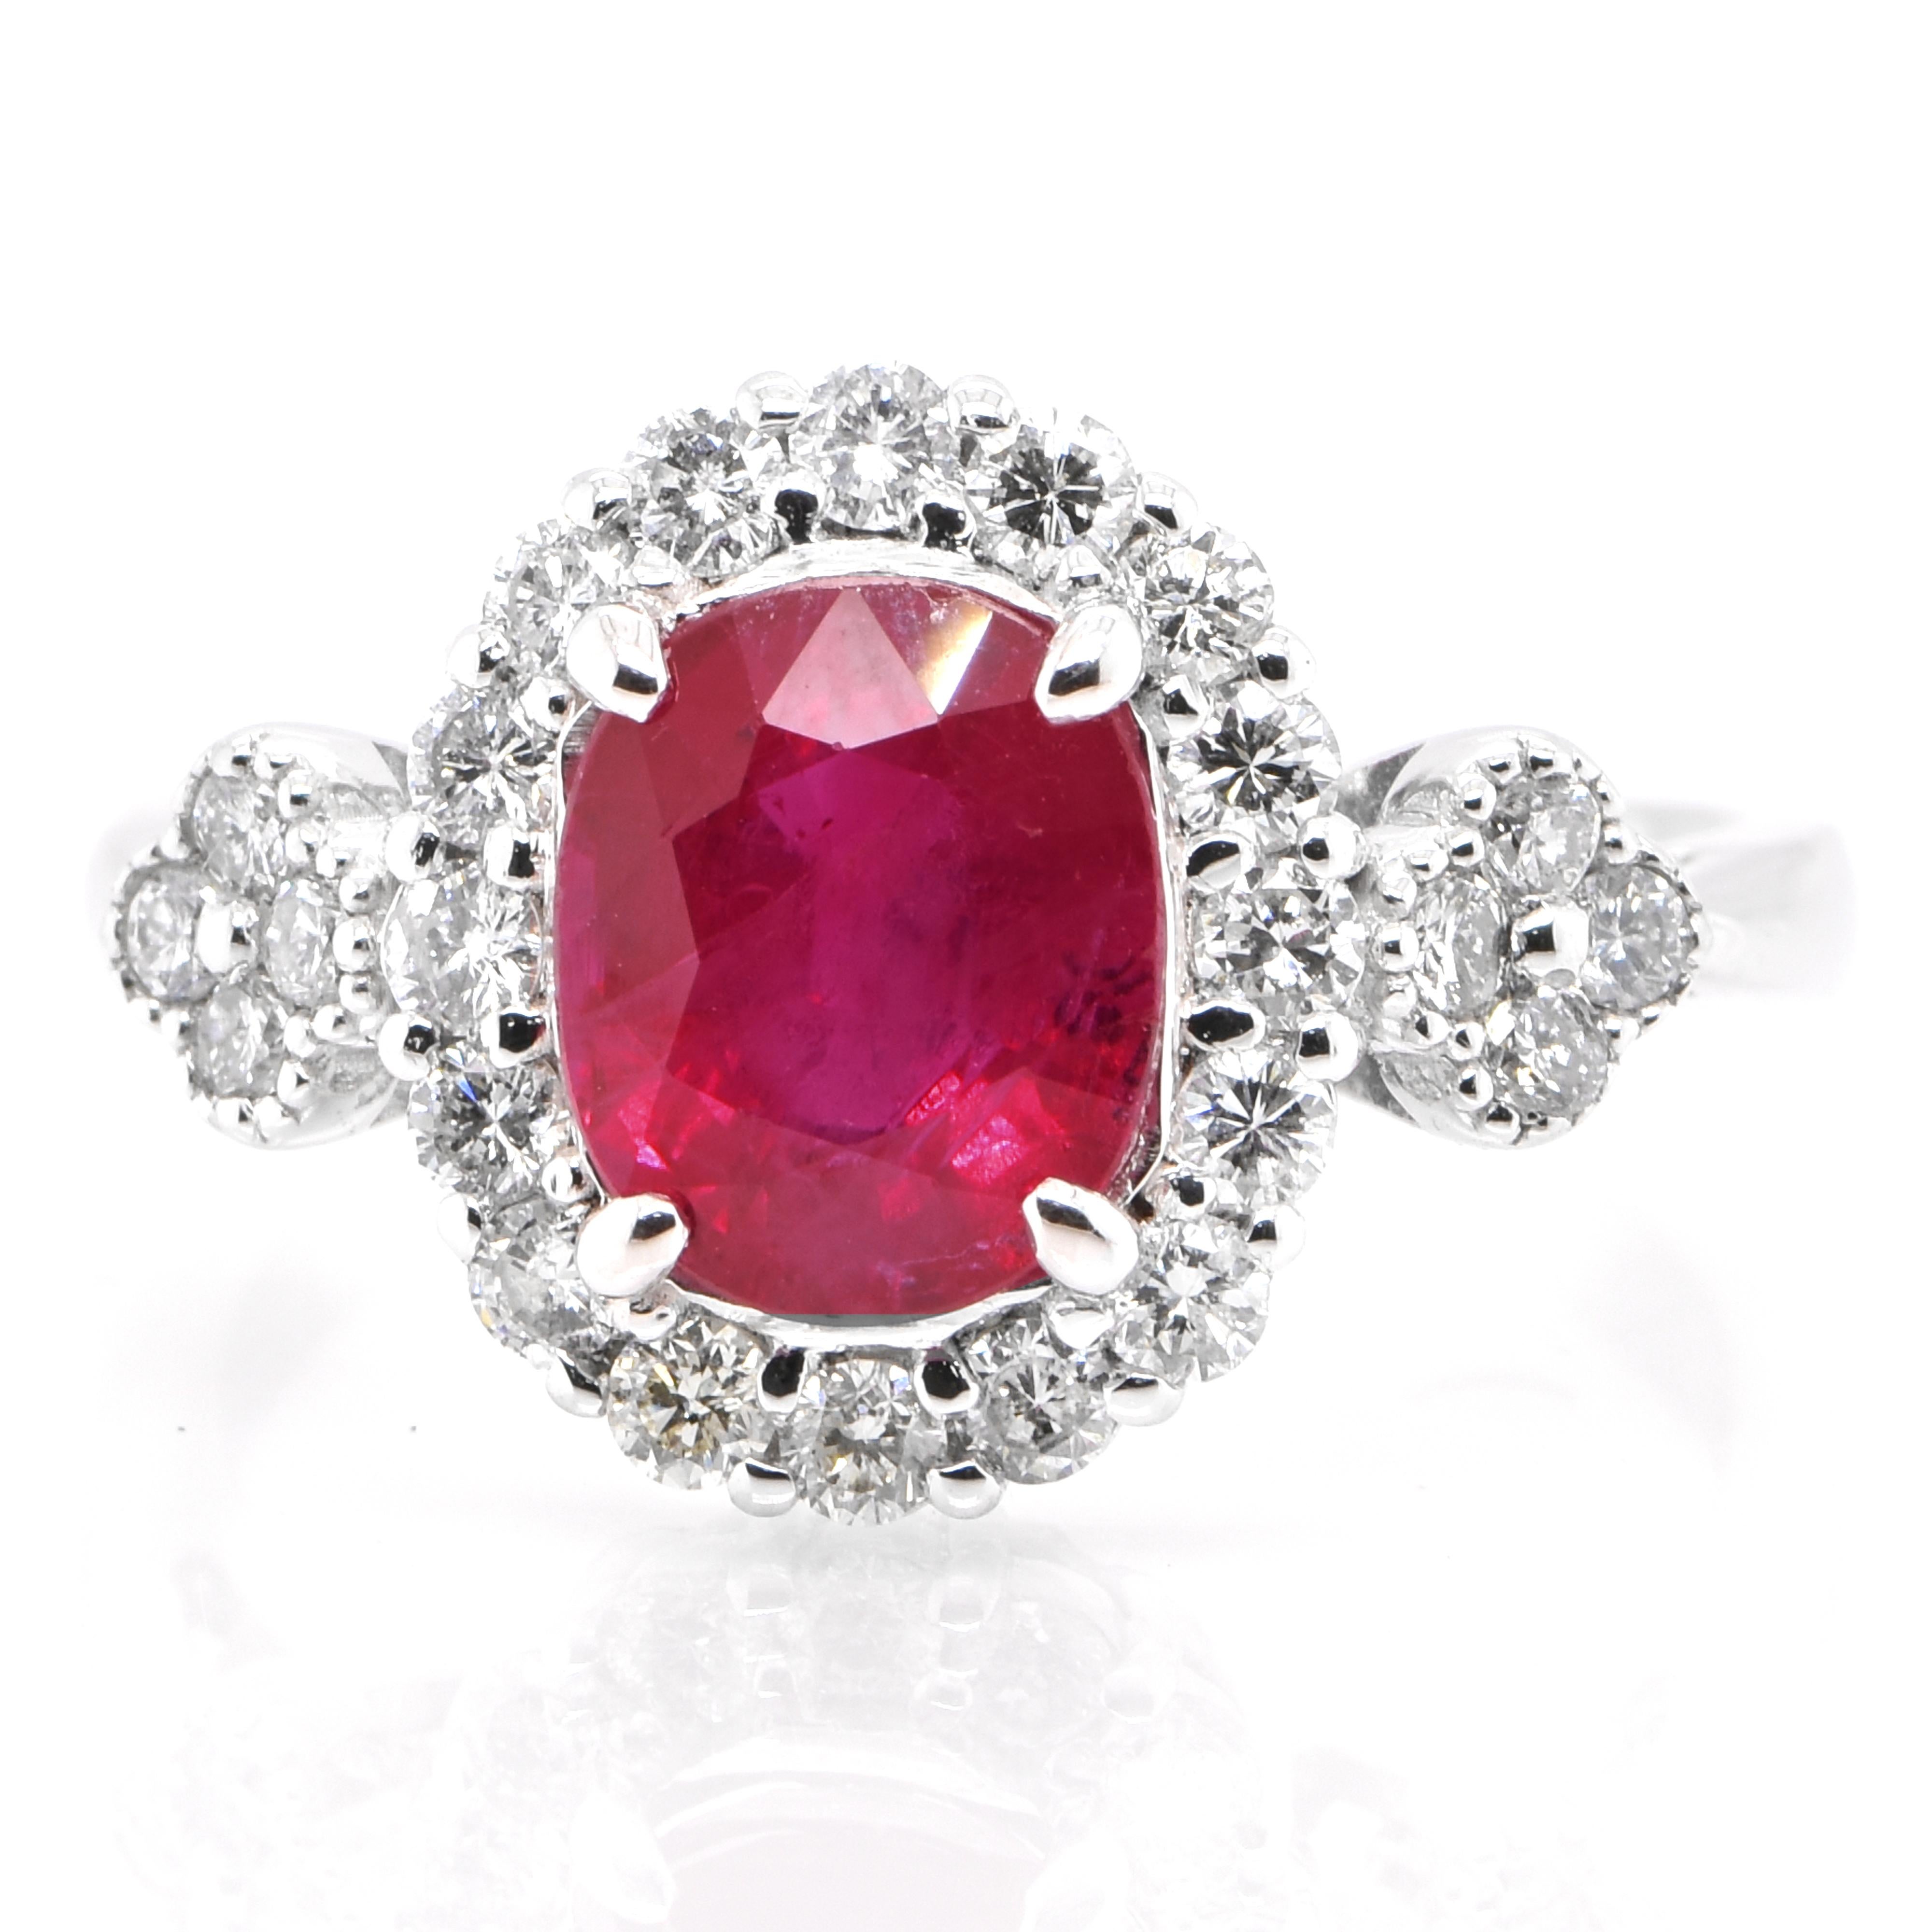 A beautiful ring set in Platinum featuring a GIA Certified 2.39 Carat Natural Ruby and 0.55 Carat Diamonds. Rubies are referred to as 